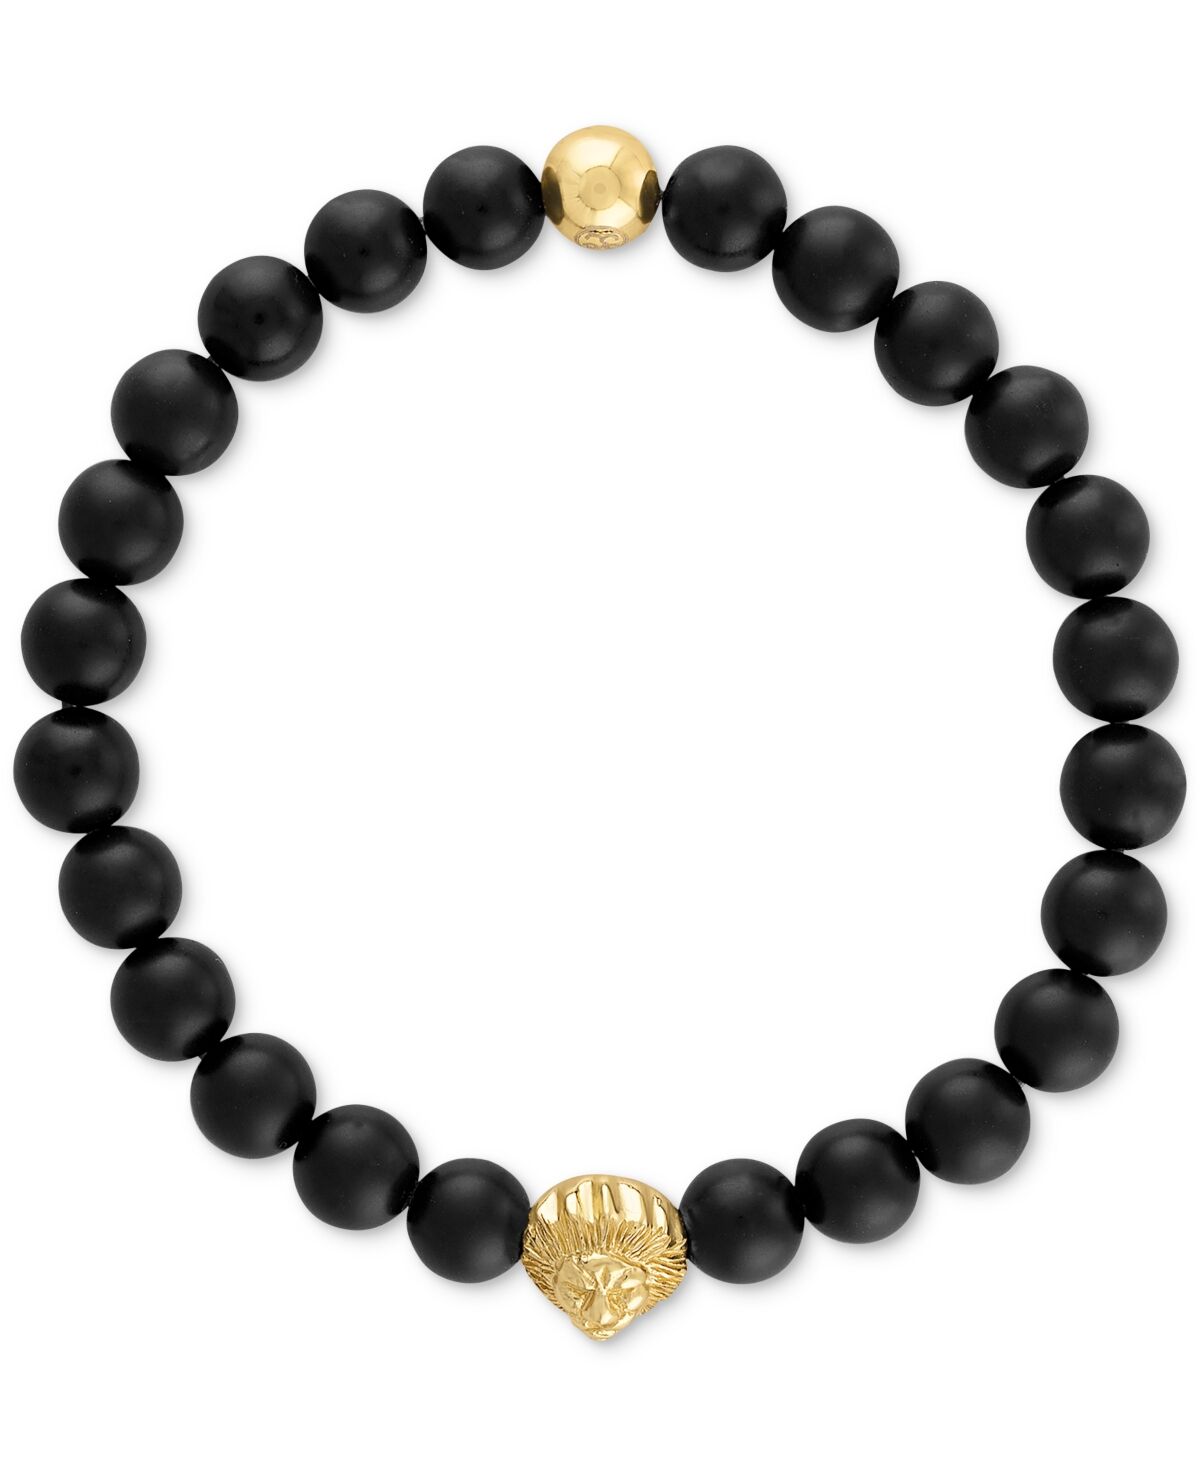 Esquire Men's Jewelry Onyx & Lion Bead Stretch Bracelet in 14k Gold-Plated Sterling Silver, (Also in Blue Tiger Eye), Created for Macy's - Black Onyx